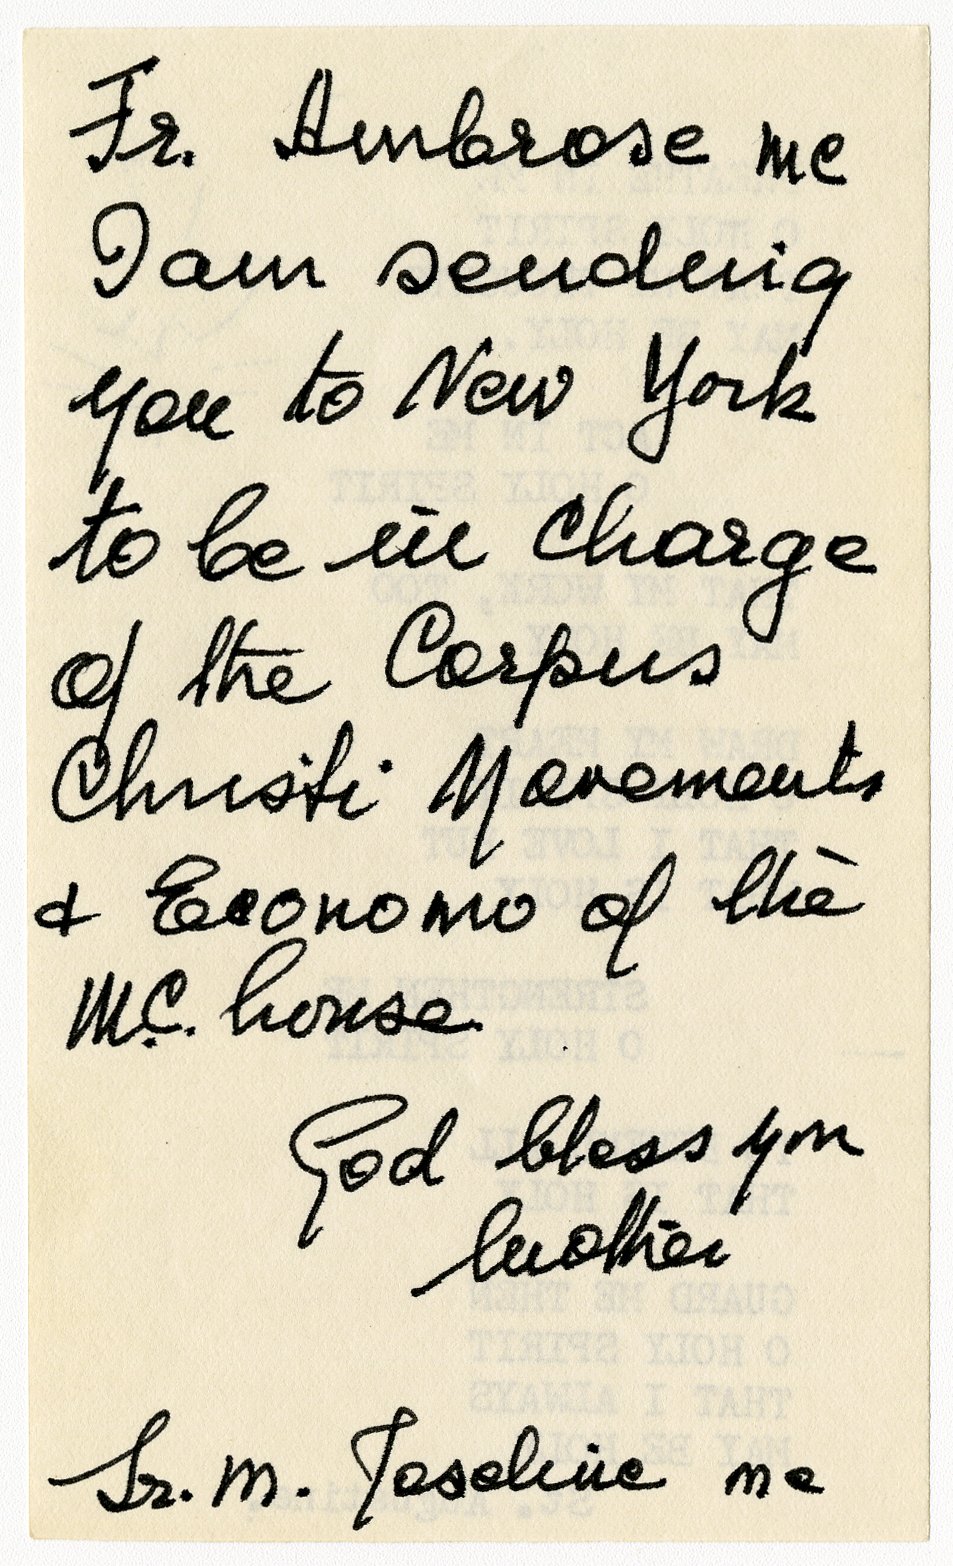 Letter from Mother Teresa to Msgr. Sheehy